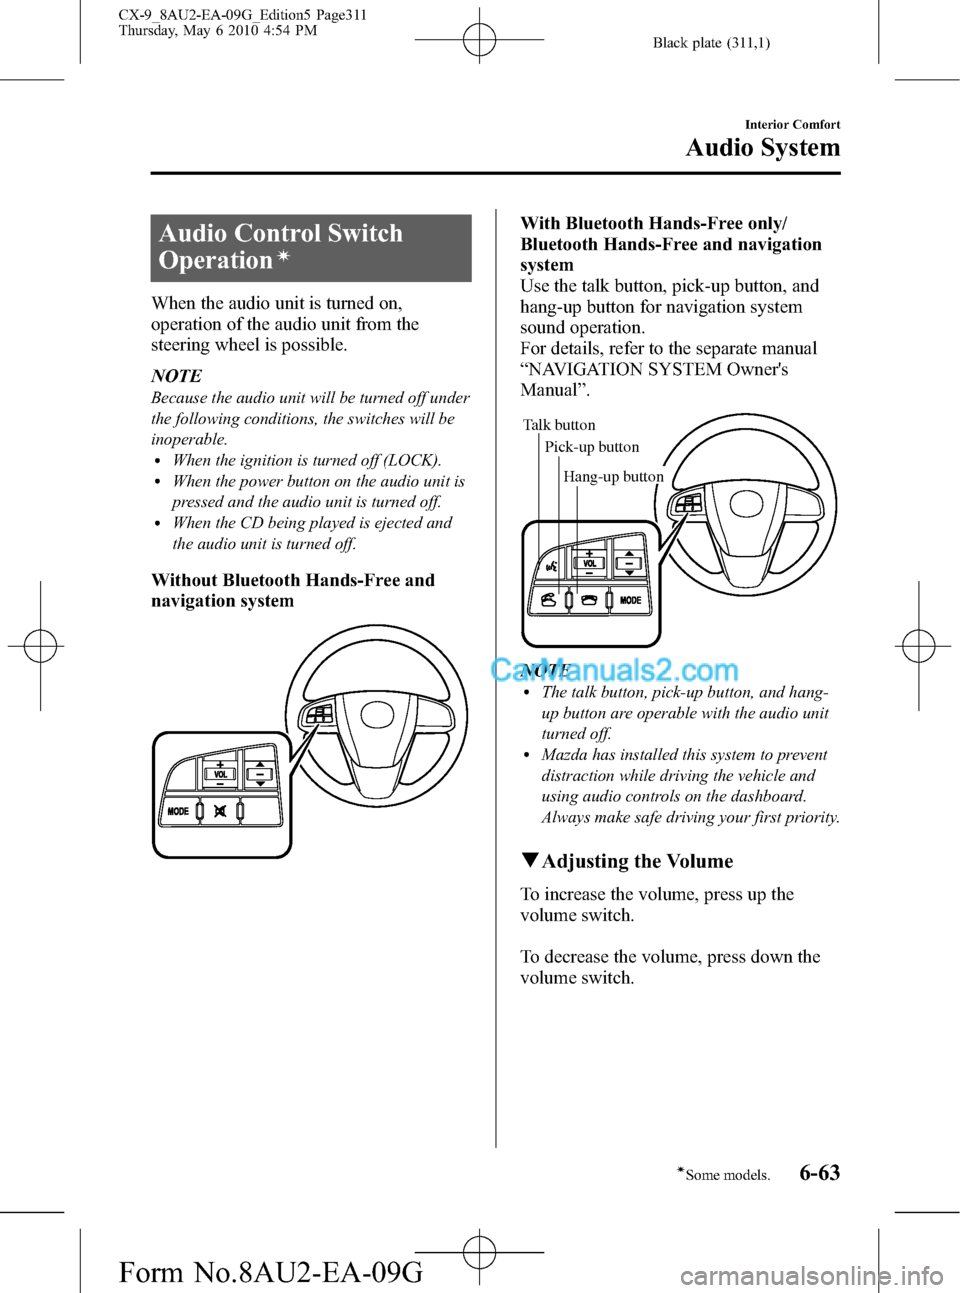 MAZDA MODEL CX-9 2010  Owners Manual (in English) Black plate (311,1)
Audio Control Switch
Operation
í
When the audio unit is turned on,
operation of the audio unit from the
steering wheel is possible.
NOTE
Because the audio unit will be turned off 